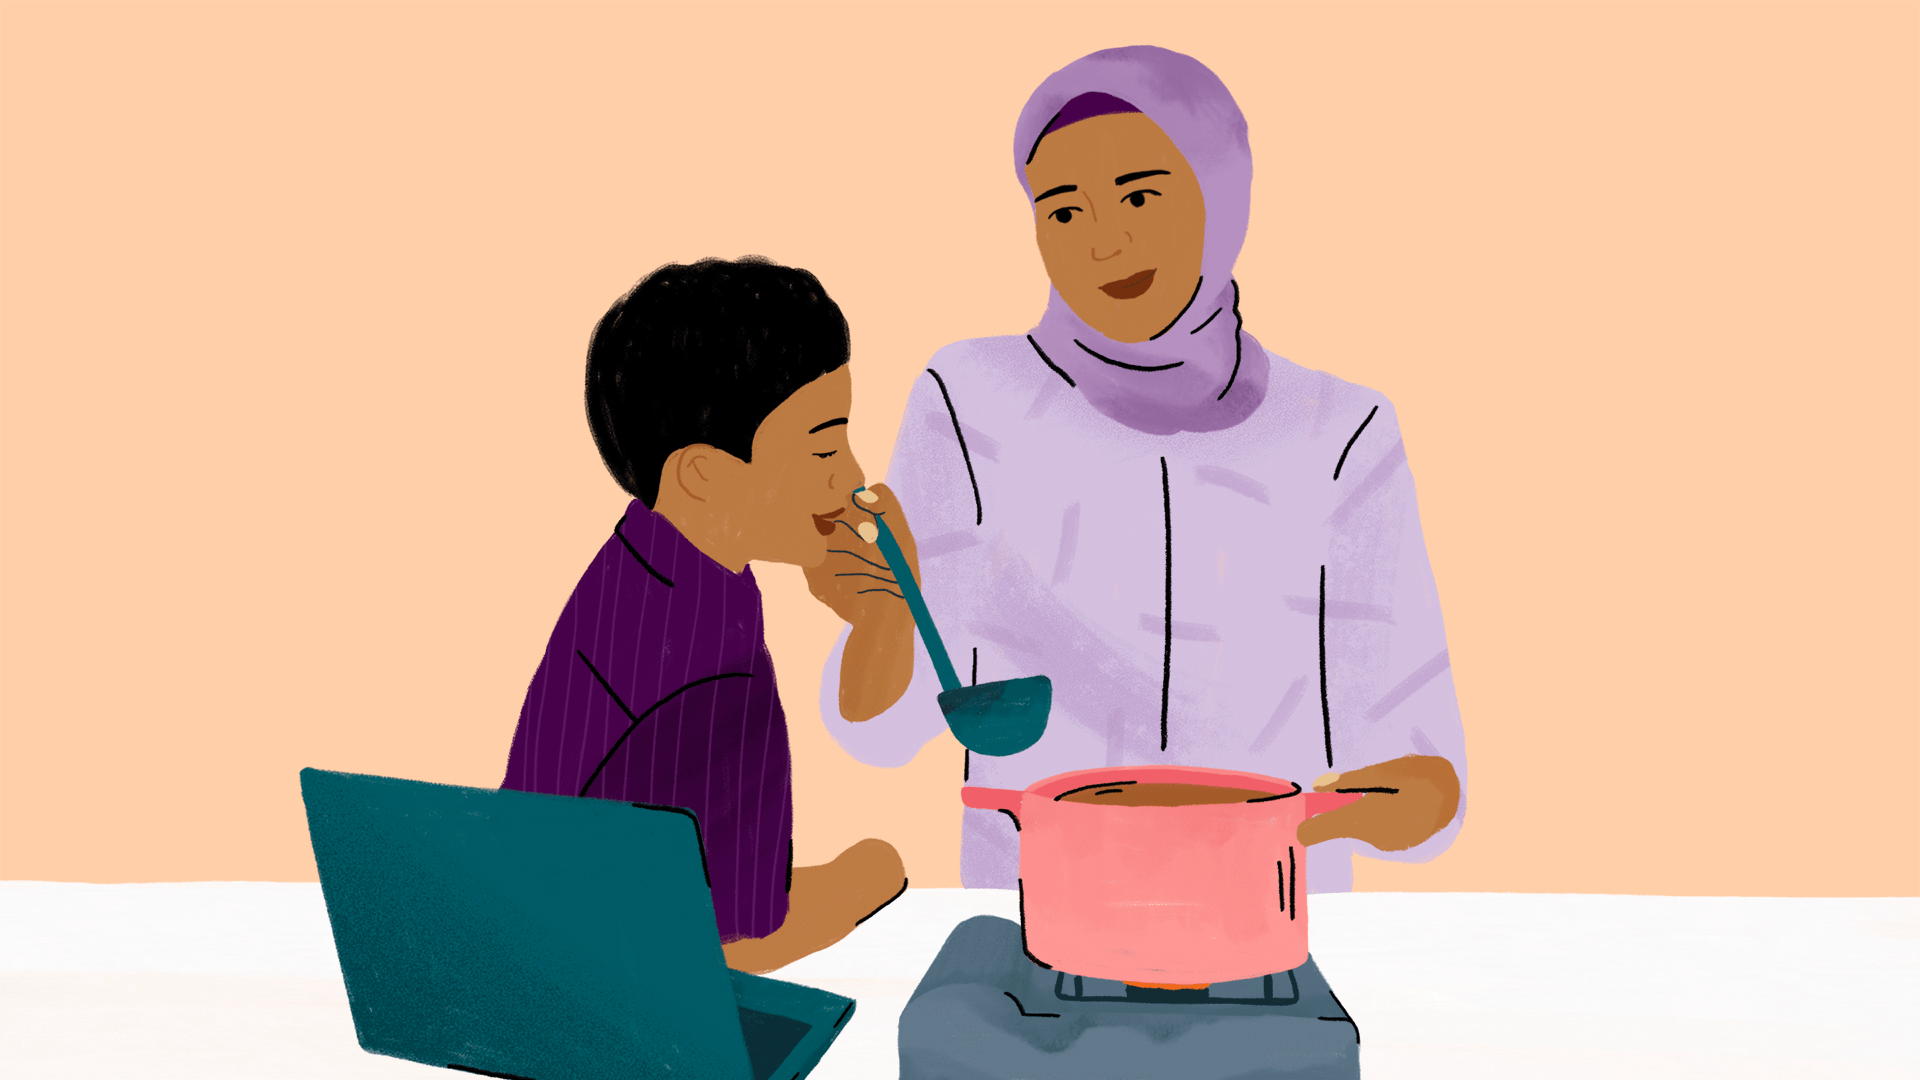 Illustration or a mother and child cooking